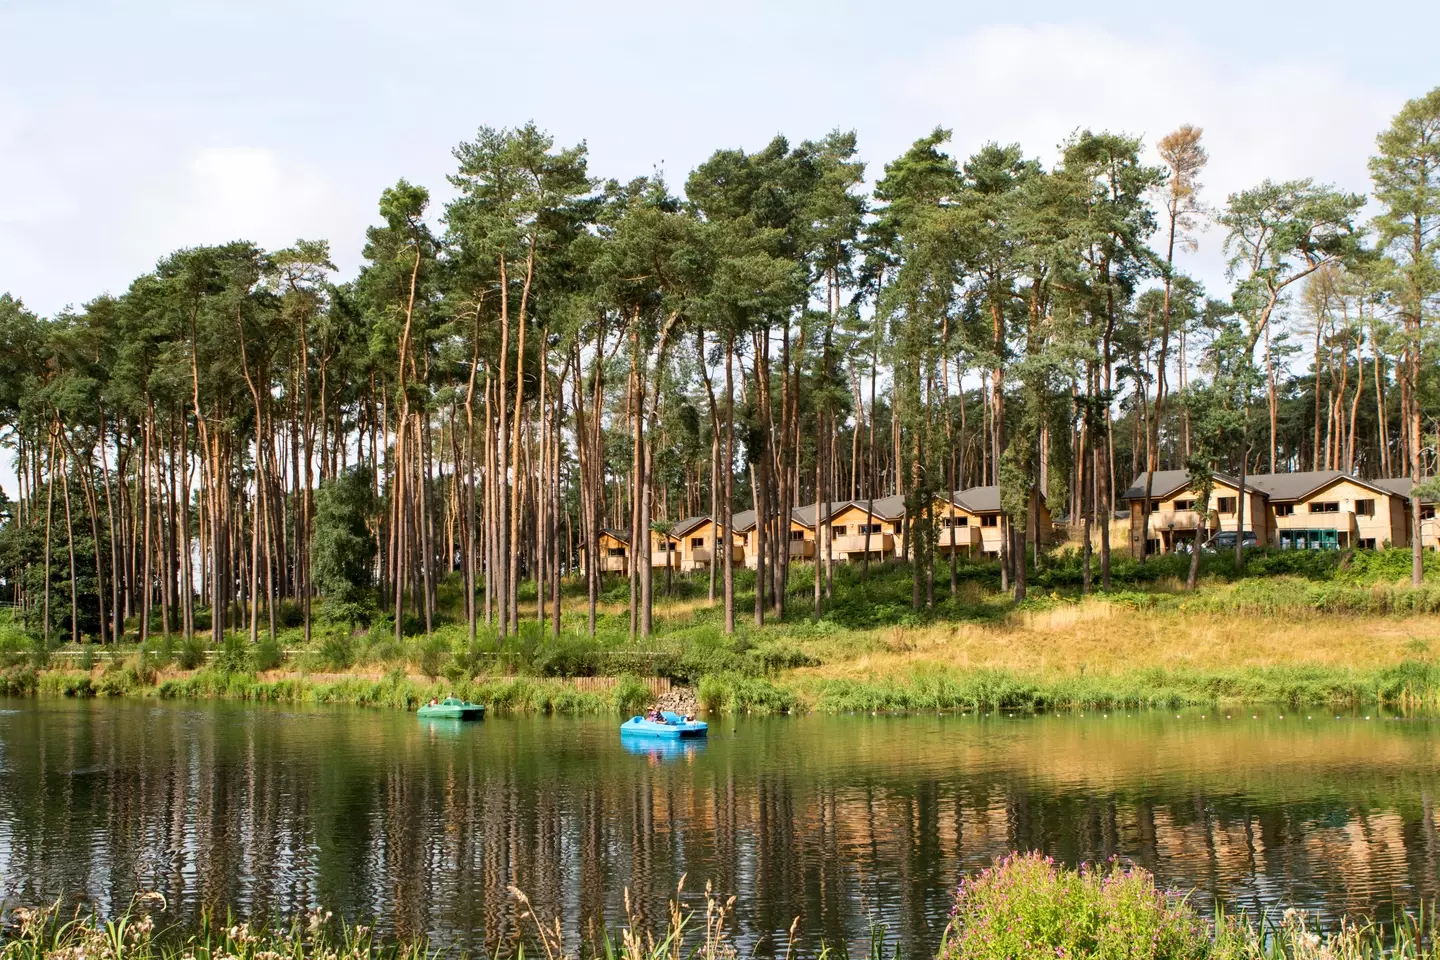 Center Parcs is closing all of its sites for the Queen's funeral.